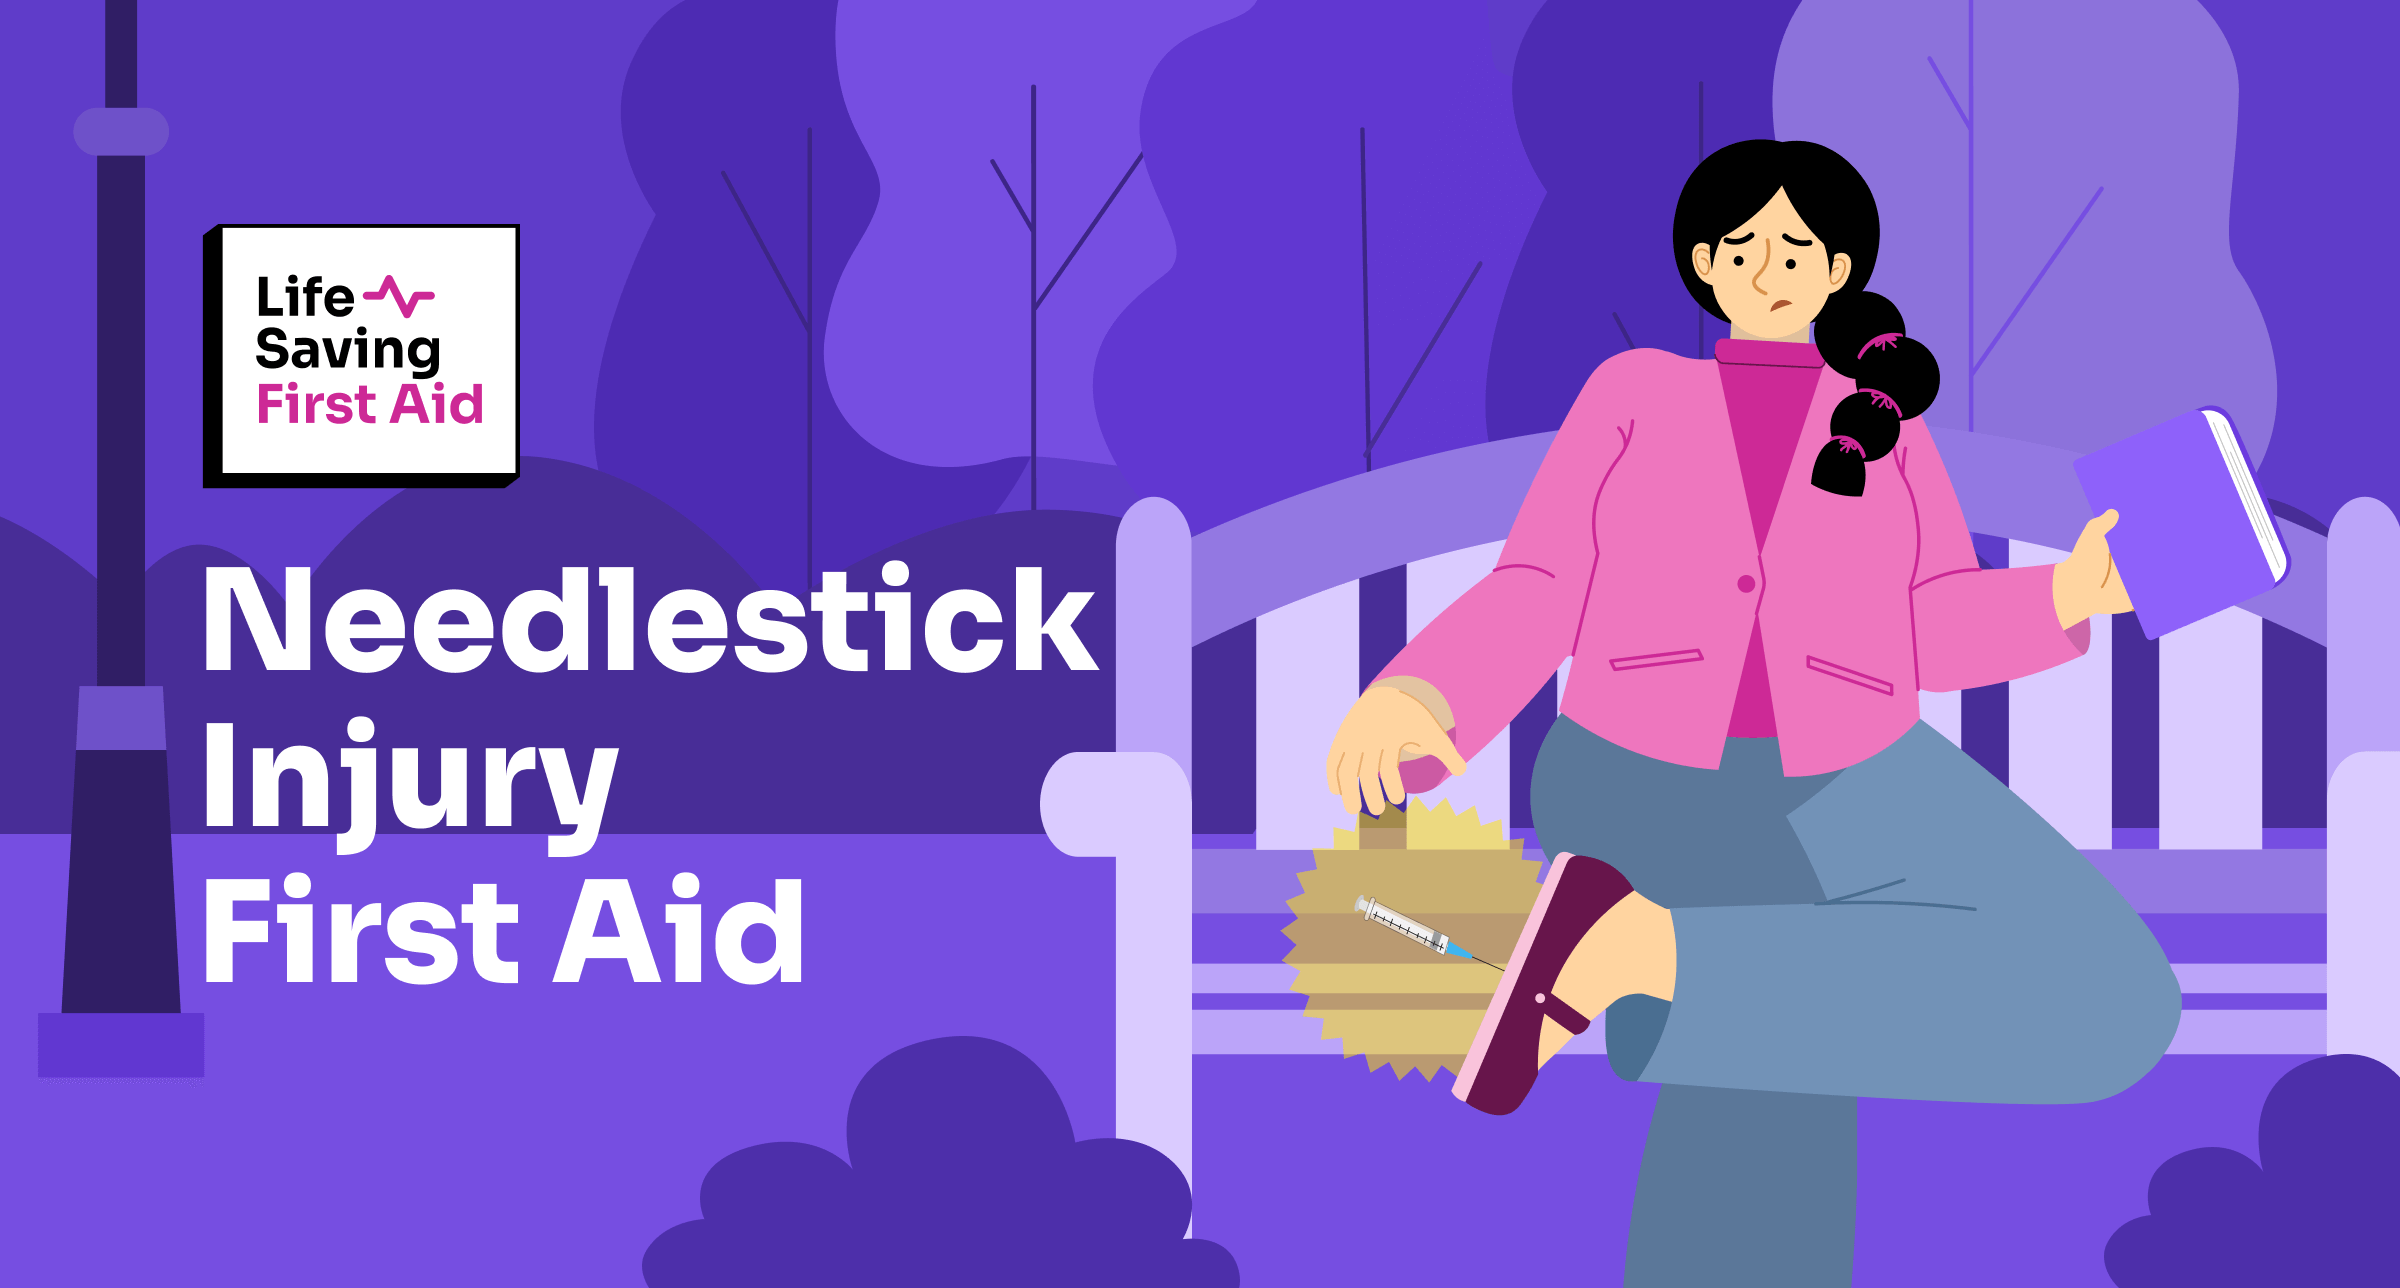 Image of someone who got their feet poked with a syringe in a park. The title of the blog is :Needlestick Injurt First Aid" followed by Life Saving First Aid logo